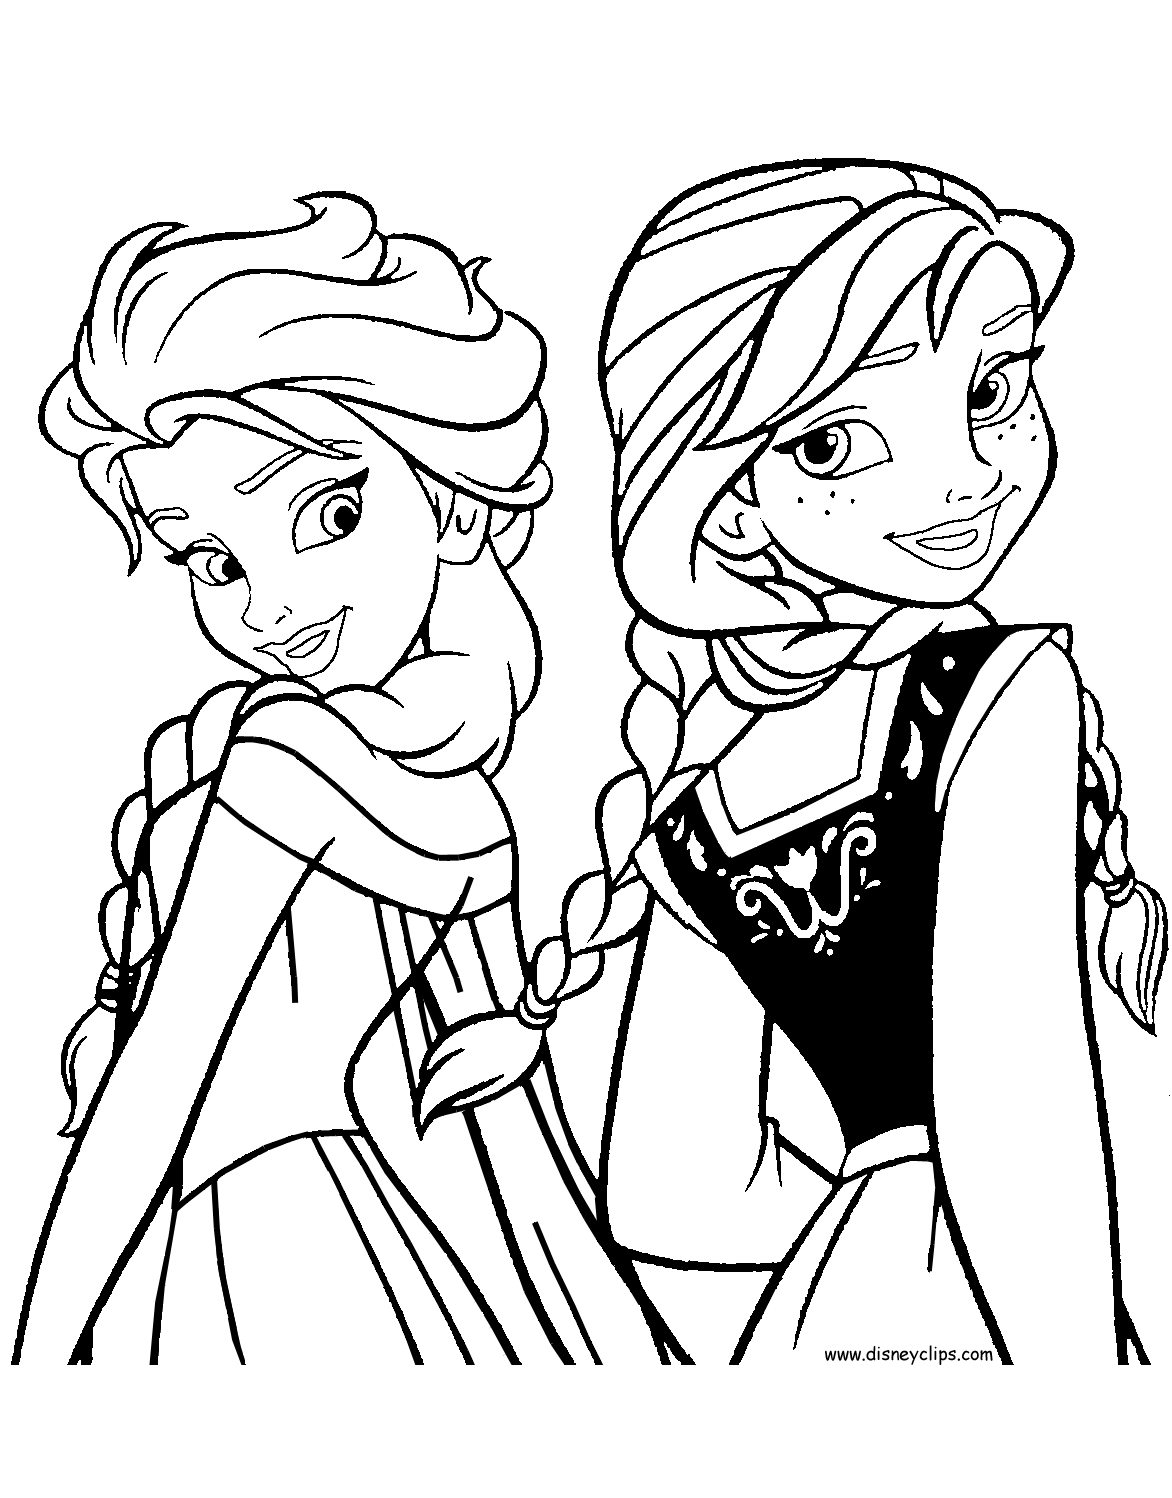 frozen characters coloring pages disney39s frozen coloring pages 2 disneyclipscom characters frozen coloring pages 